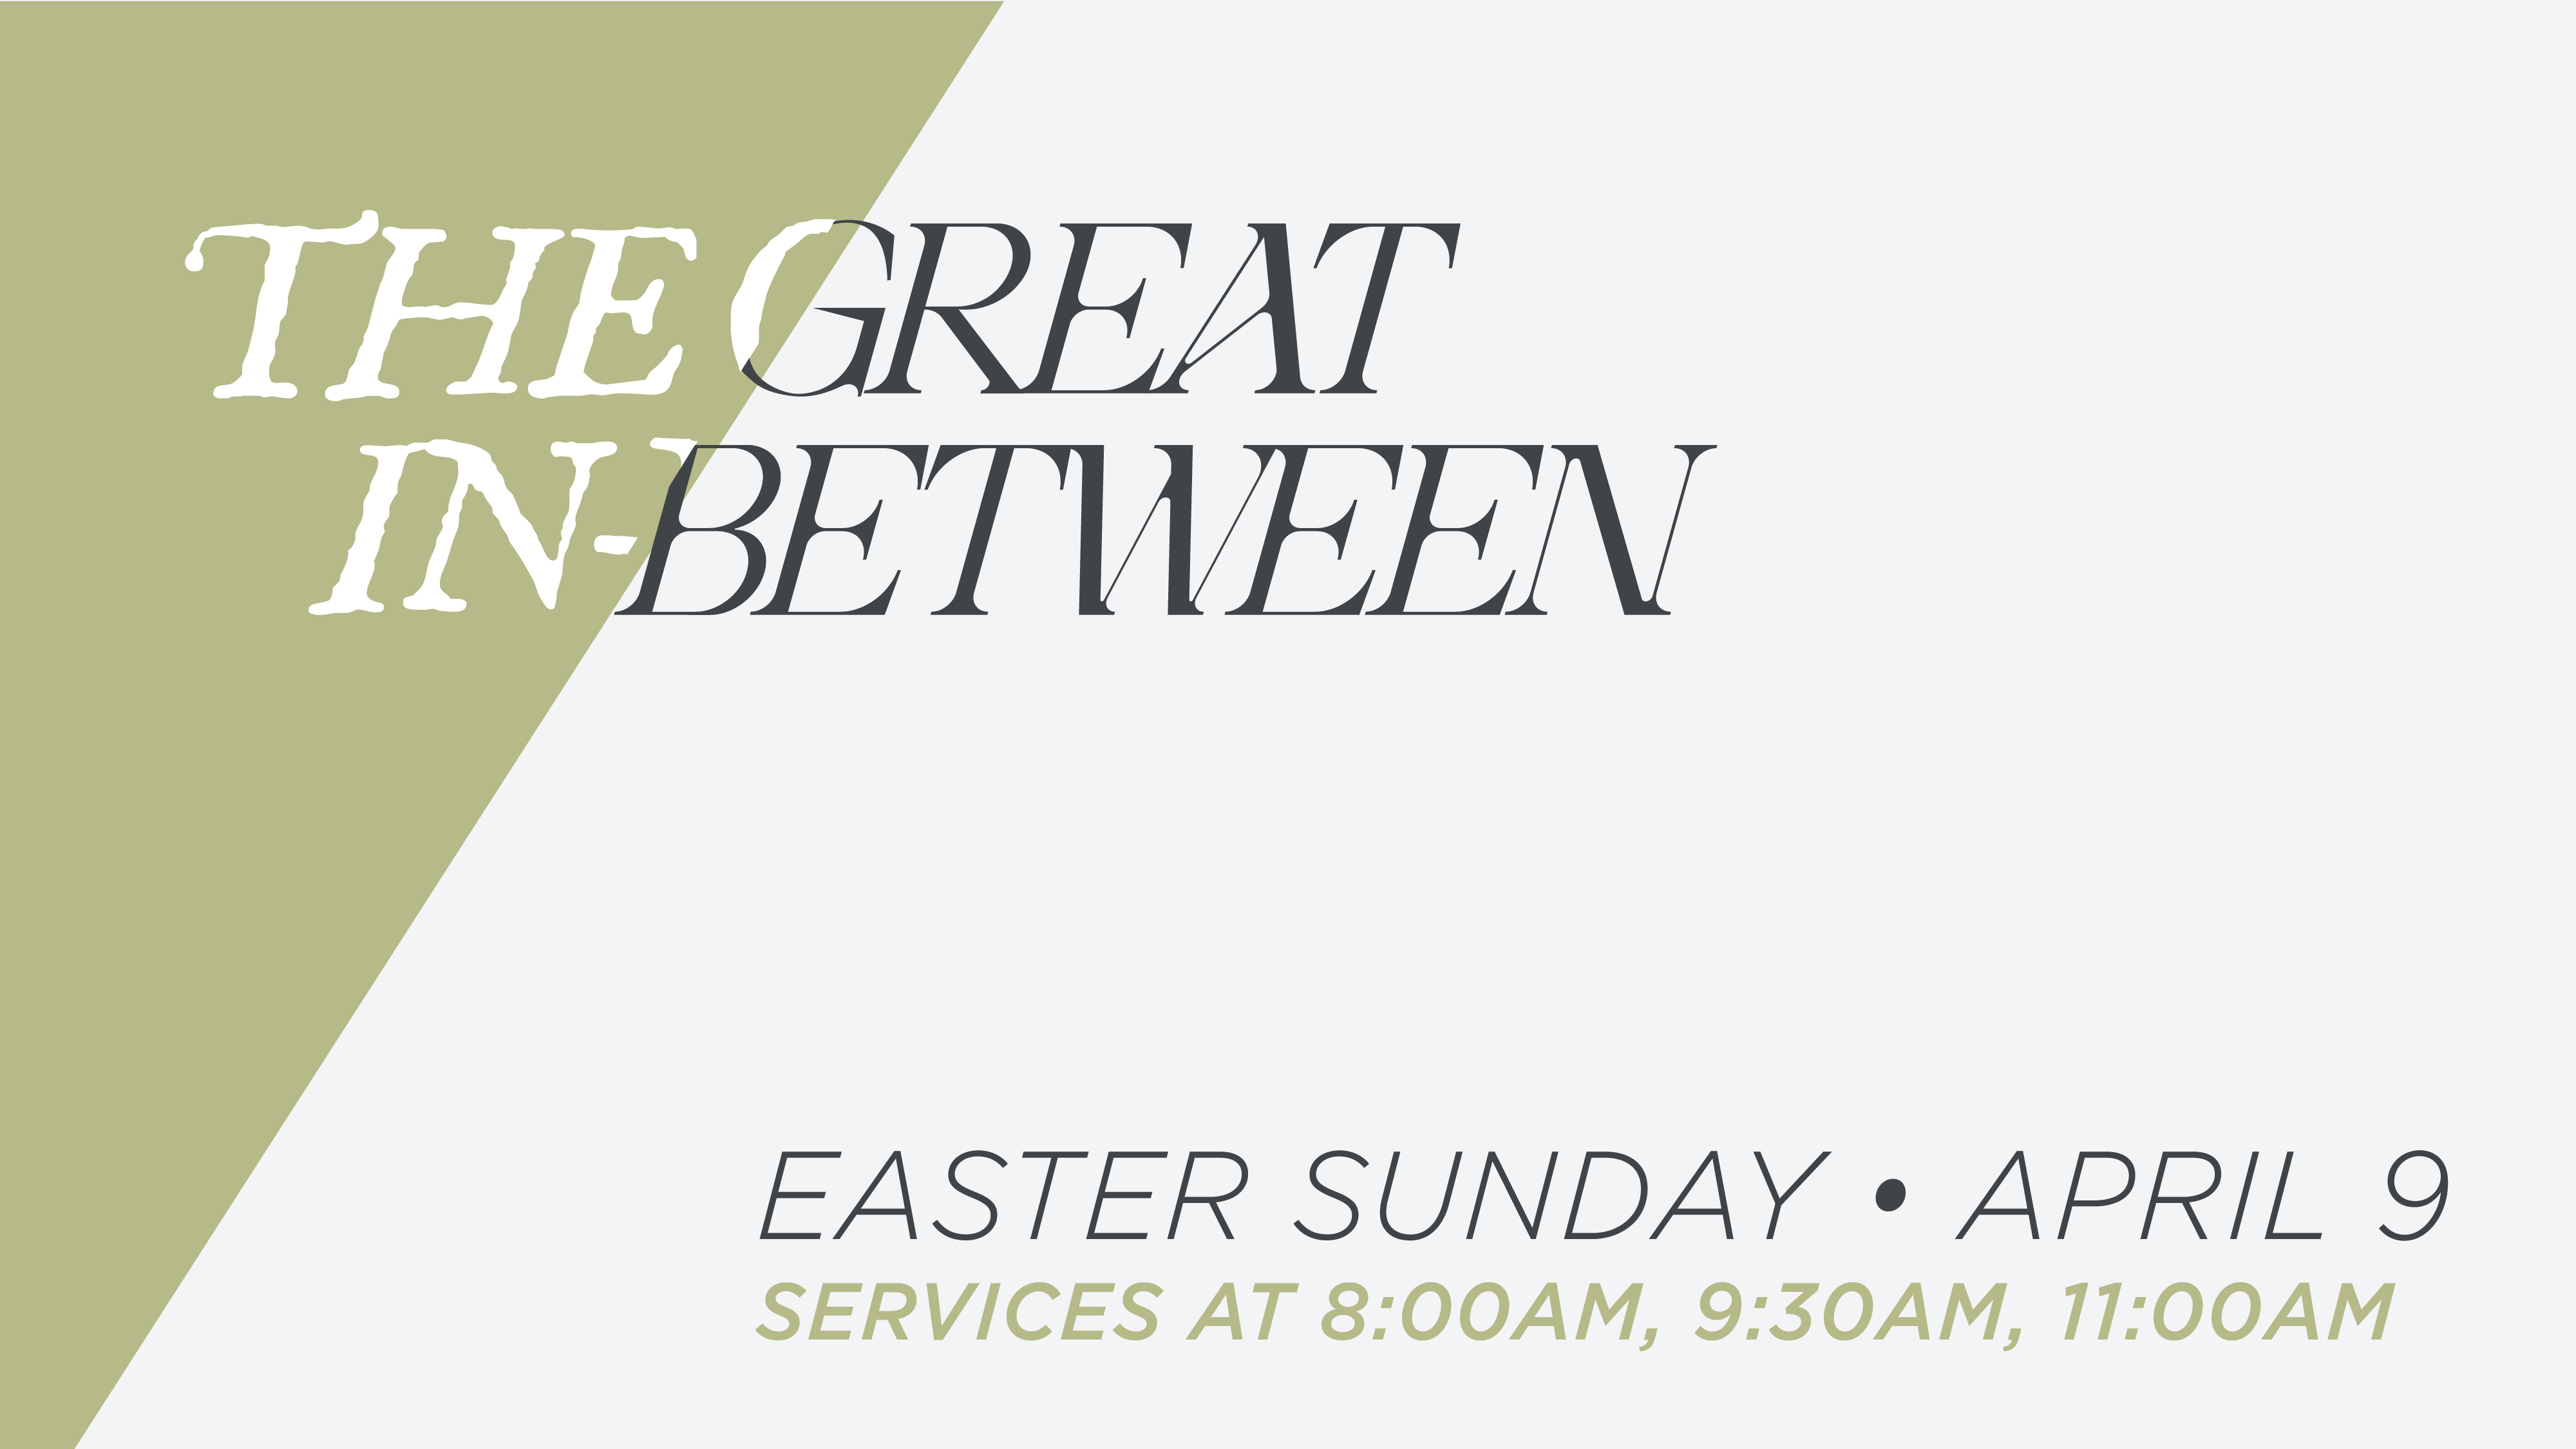 Easter Sunday Services April 9: 8:00, 9:30, 11:00 am